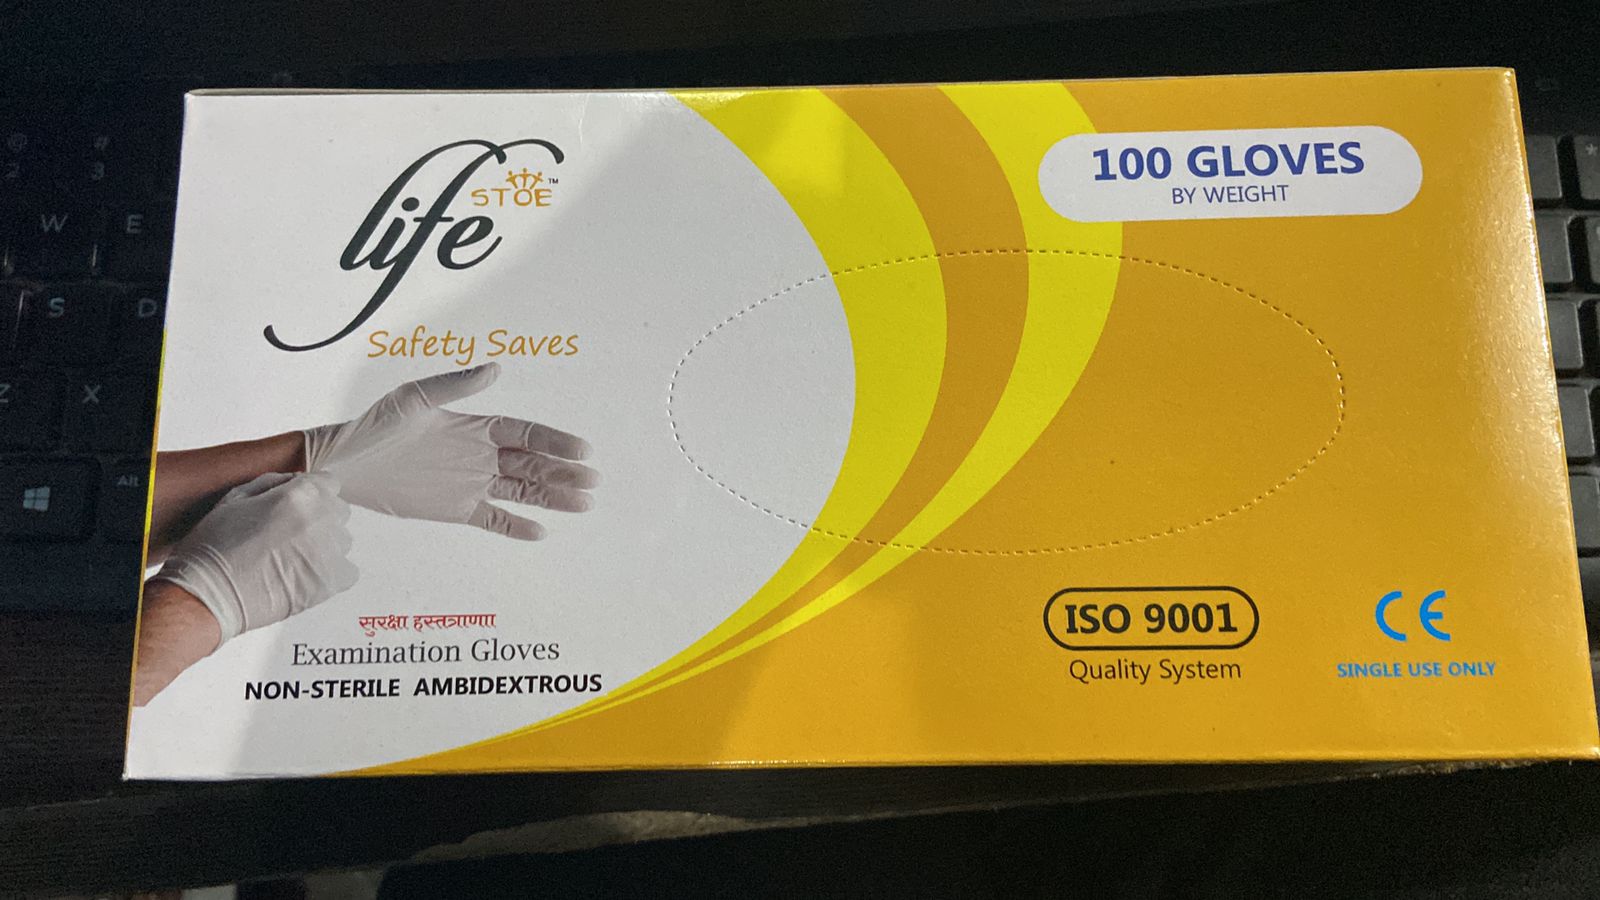 STOE Life Safety Saves Non-Sterile Ambidextrous Examination Gloves pack of 100 from B Ortho International Pvt. Ltd.